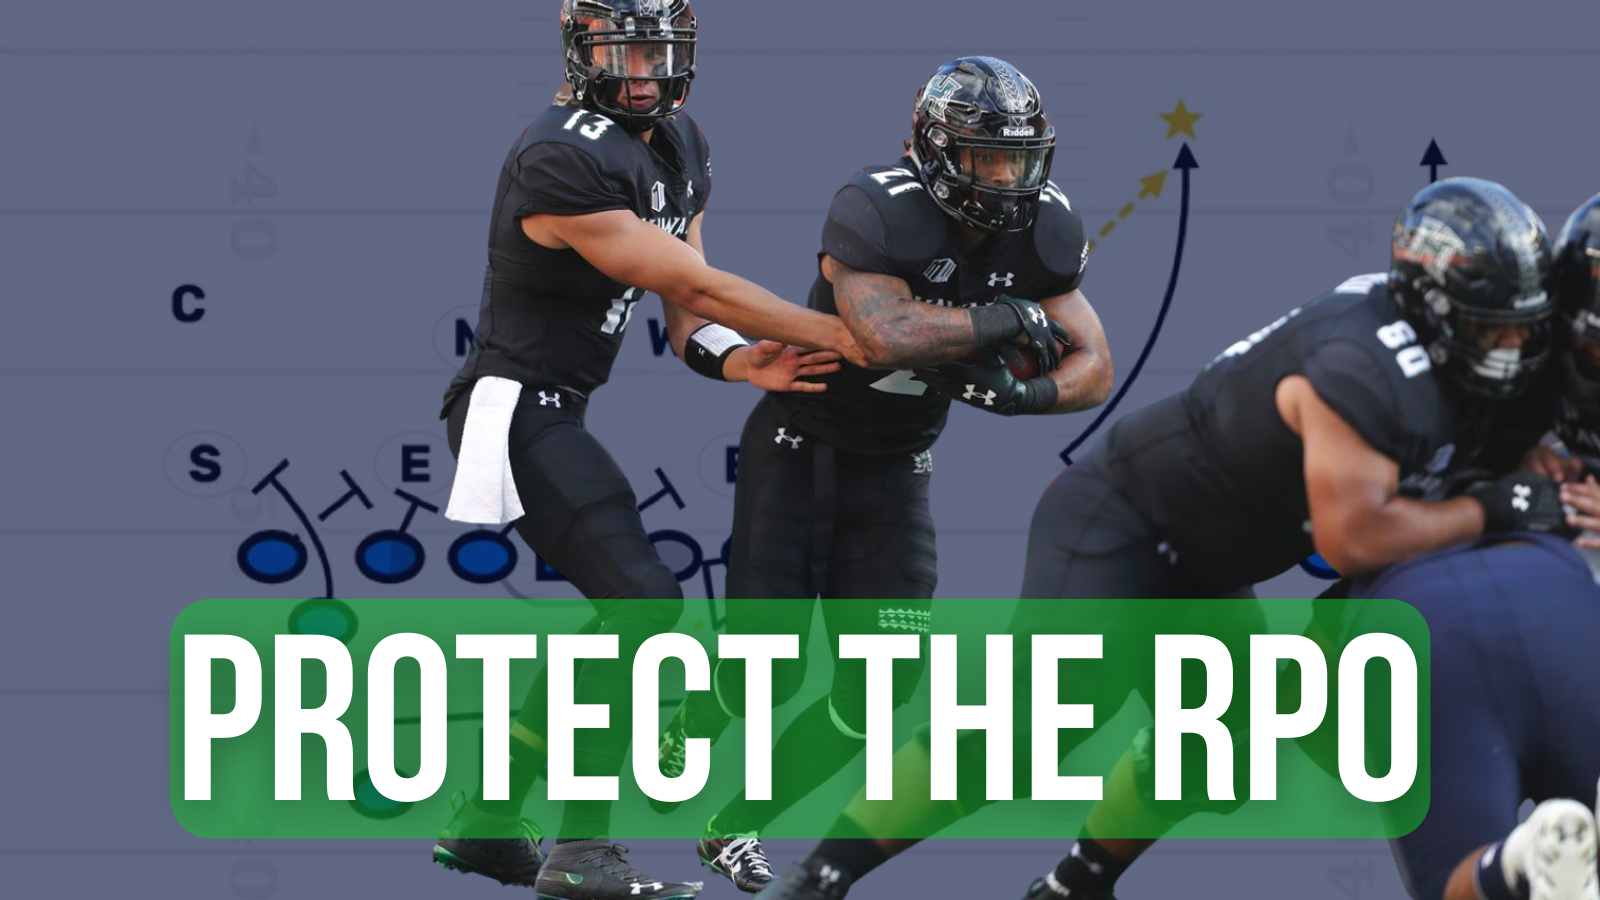 Protect the RPO, Blog, October, 2022